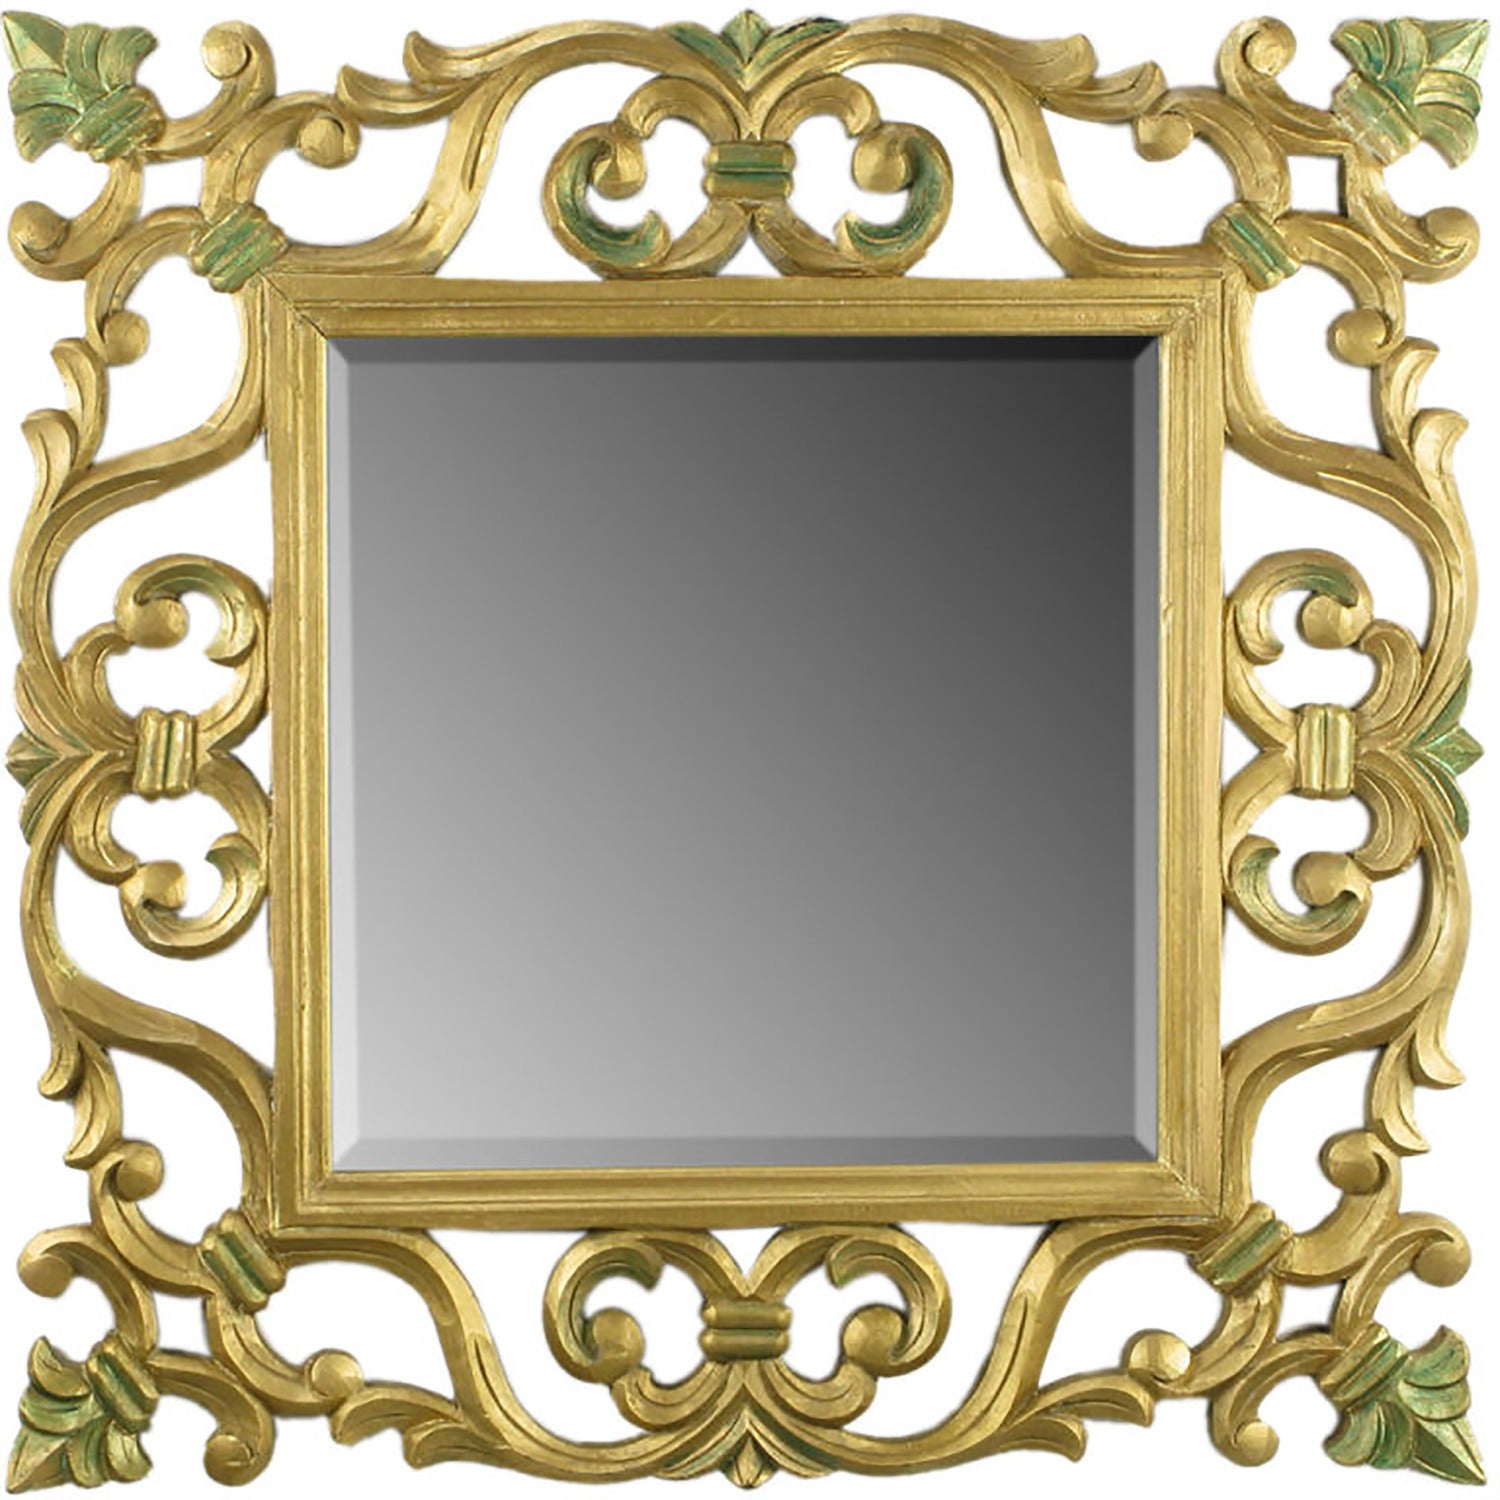 Carved Giltwood Mirror With Fleur-de-Lis Detail For Sale